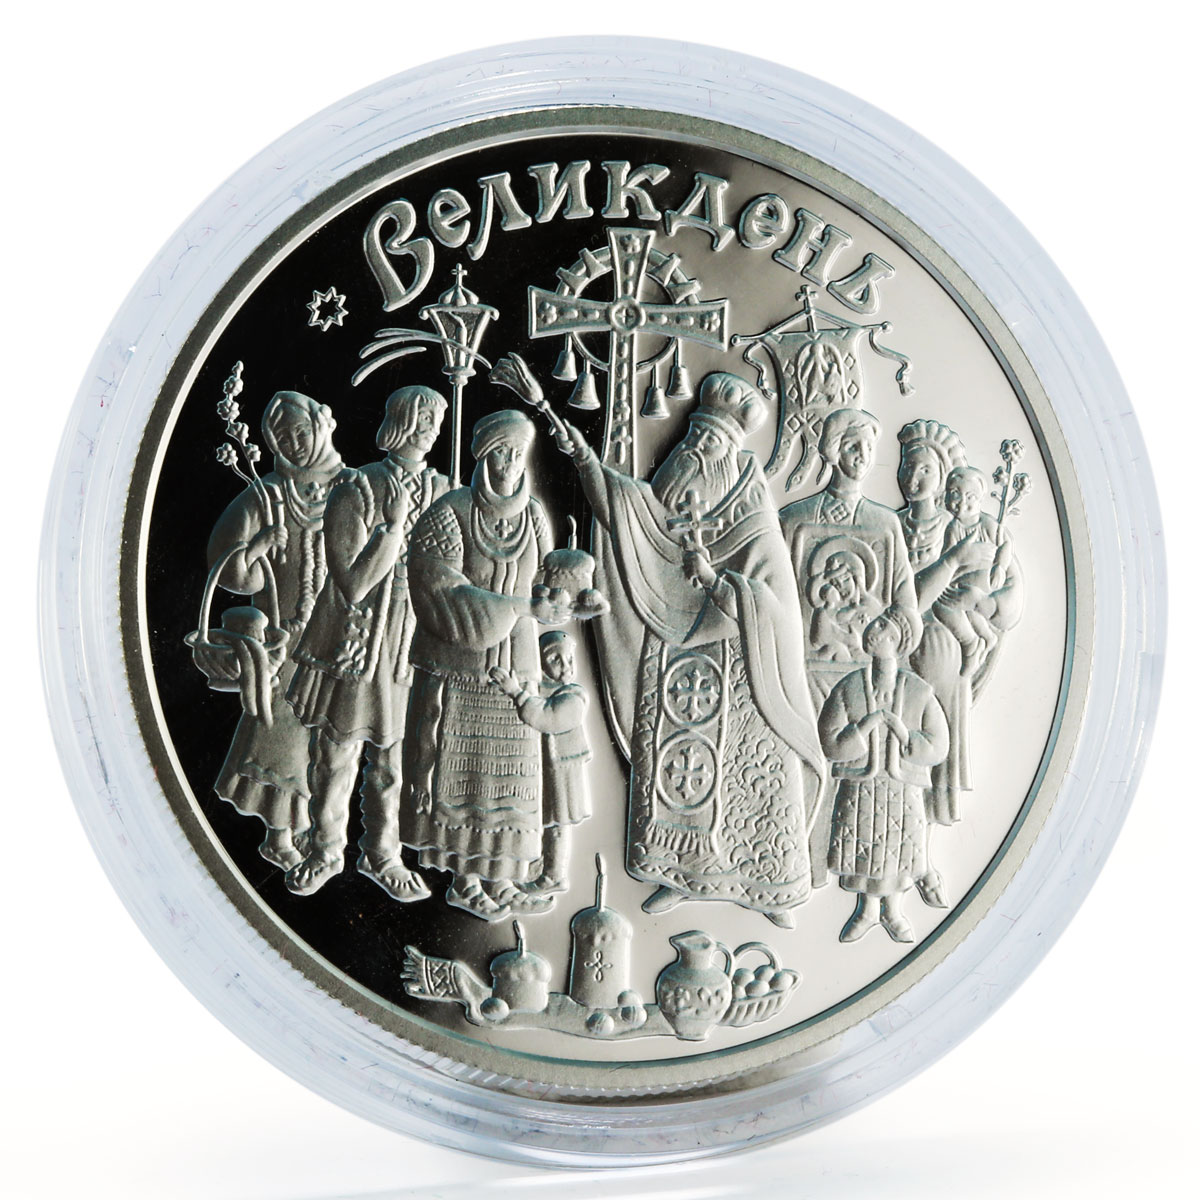 Ukraine 10 hryvnia Celebration of Easter Holiday proof silver coin 2003